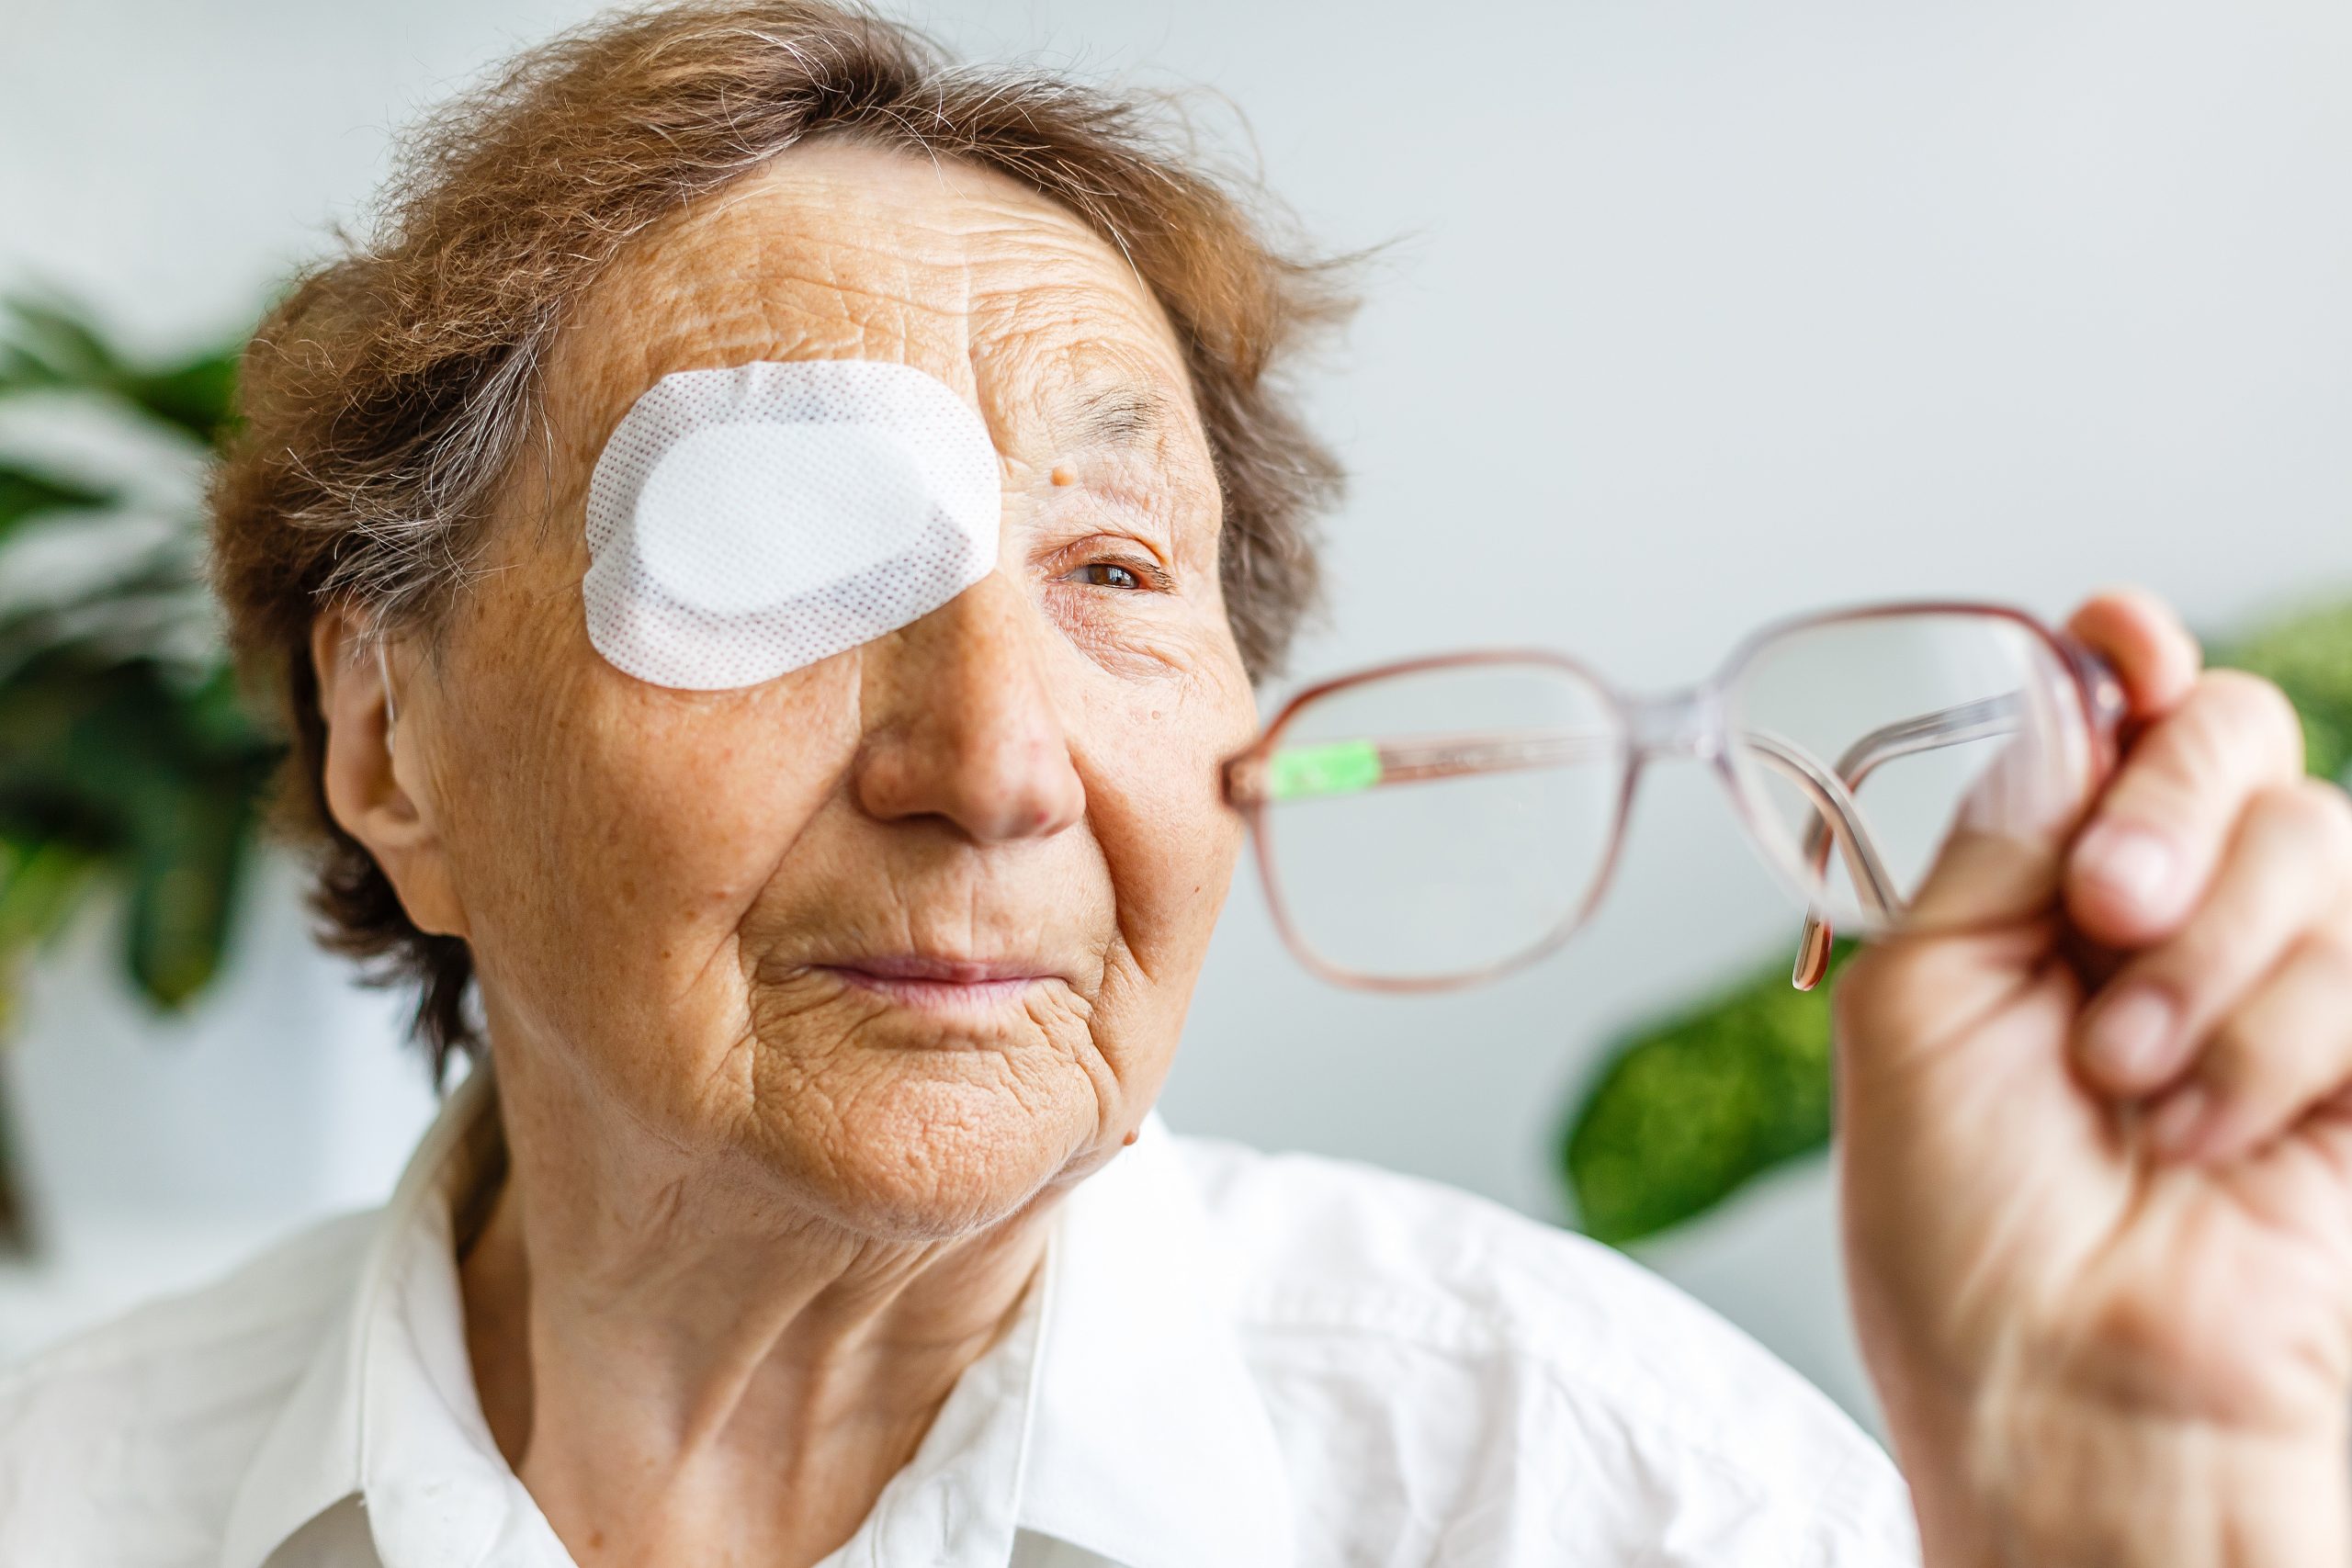 Elderly use eye shield covering after cataract surgery